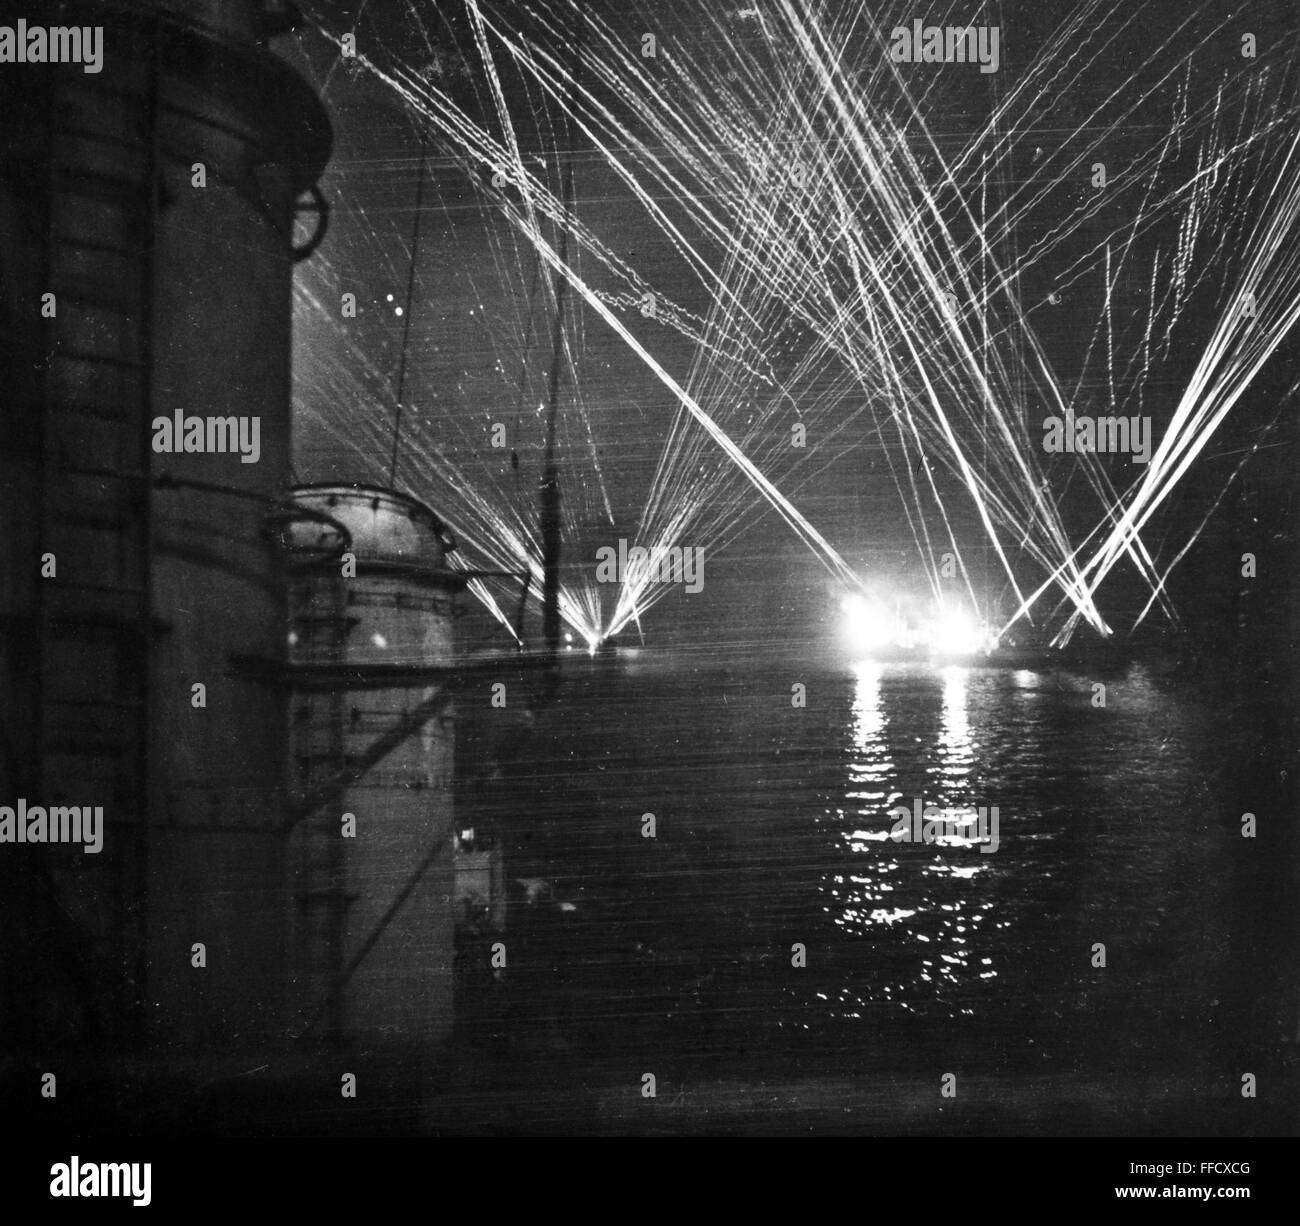 WW II: ANTI-AIRCRAFT FIRE. /nAnti-aircraft fire during a night attack on Allied vessels off Agropoli, Italy, 10 September 1943. Stock Photo